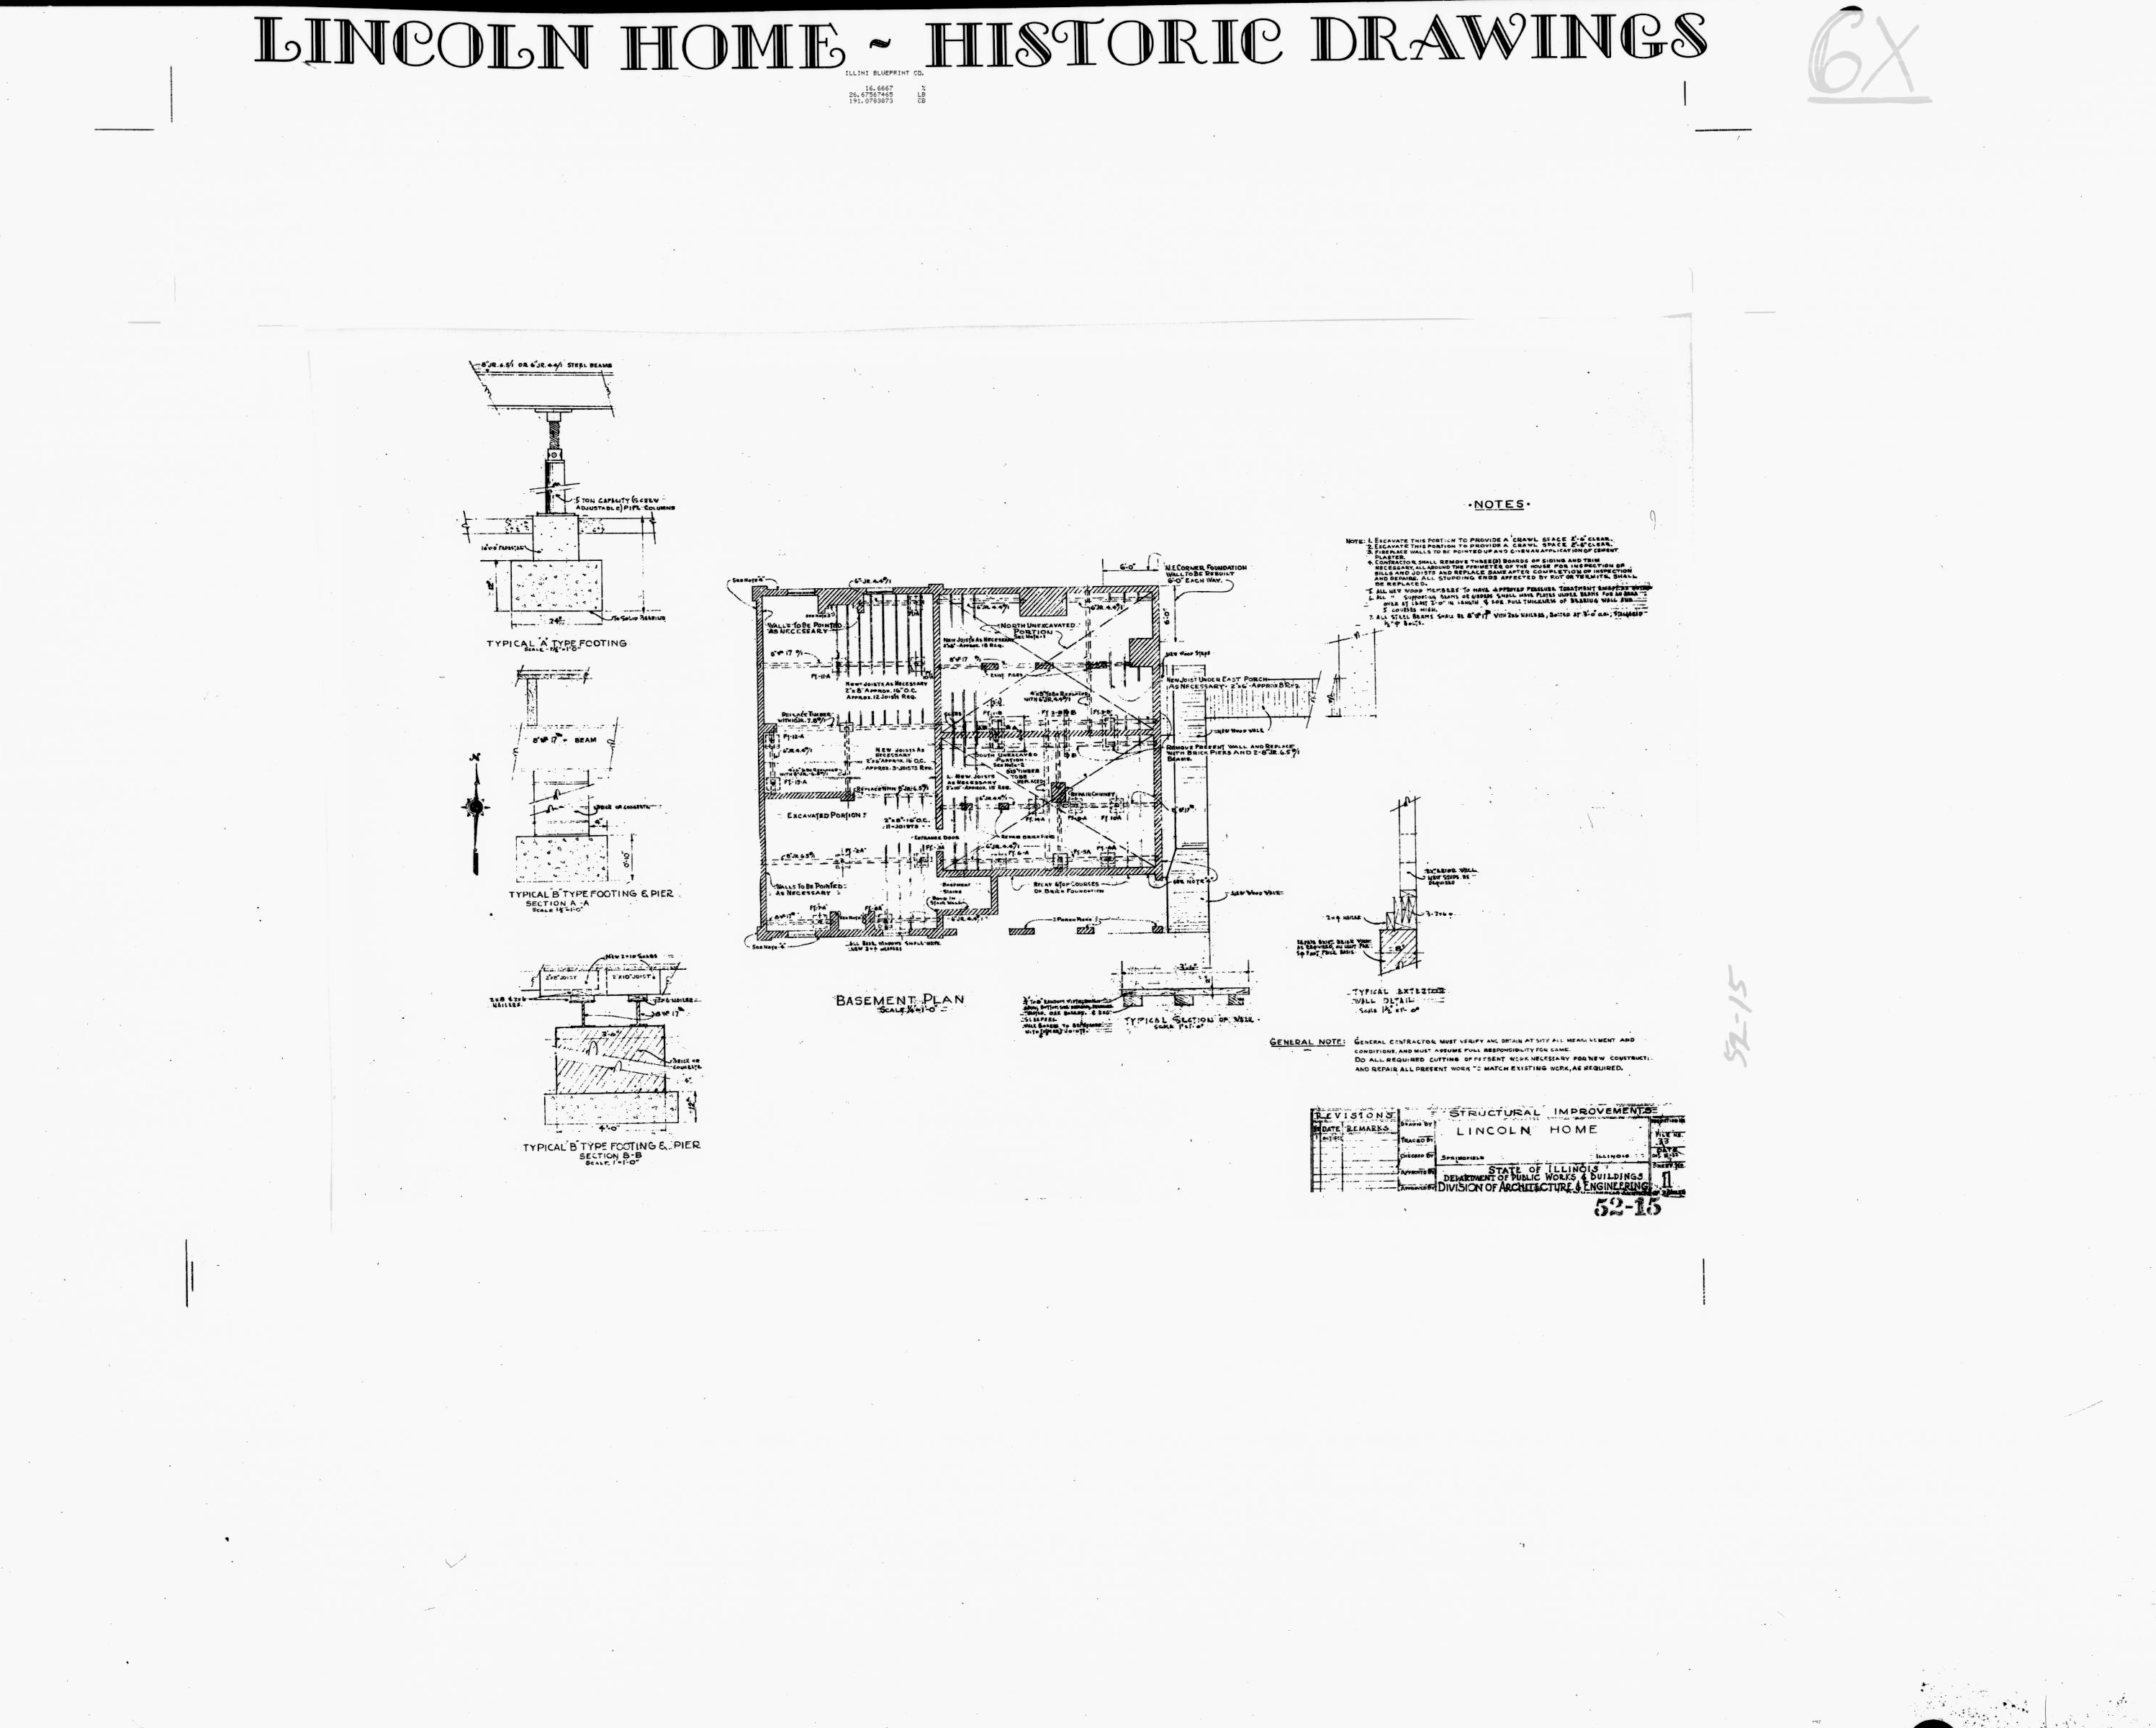 Lincoln Home - Historic Drawings  35 Lincoln, home, historic drawings, structural improvements, basement plan